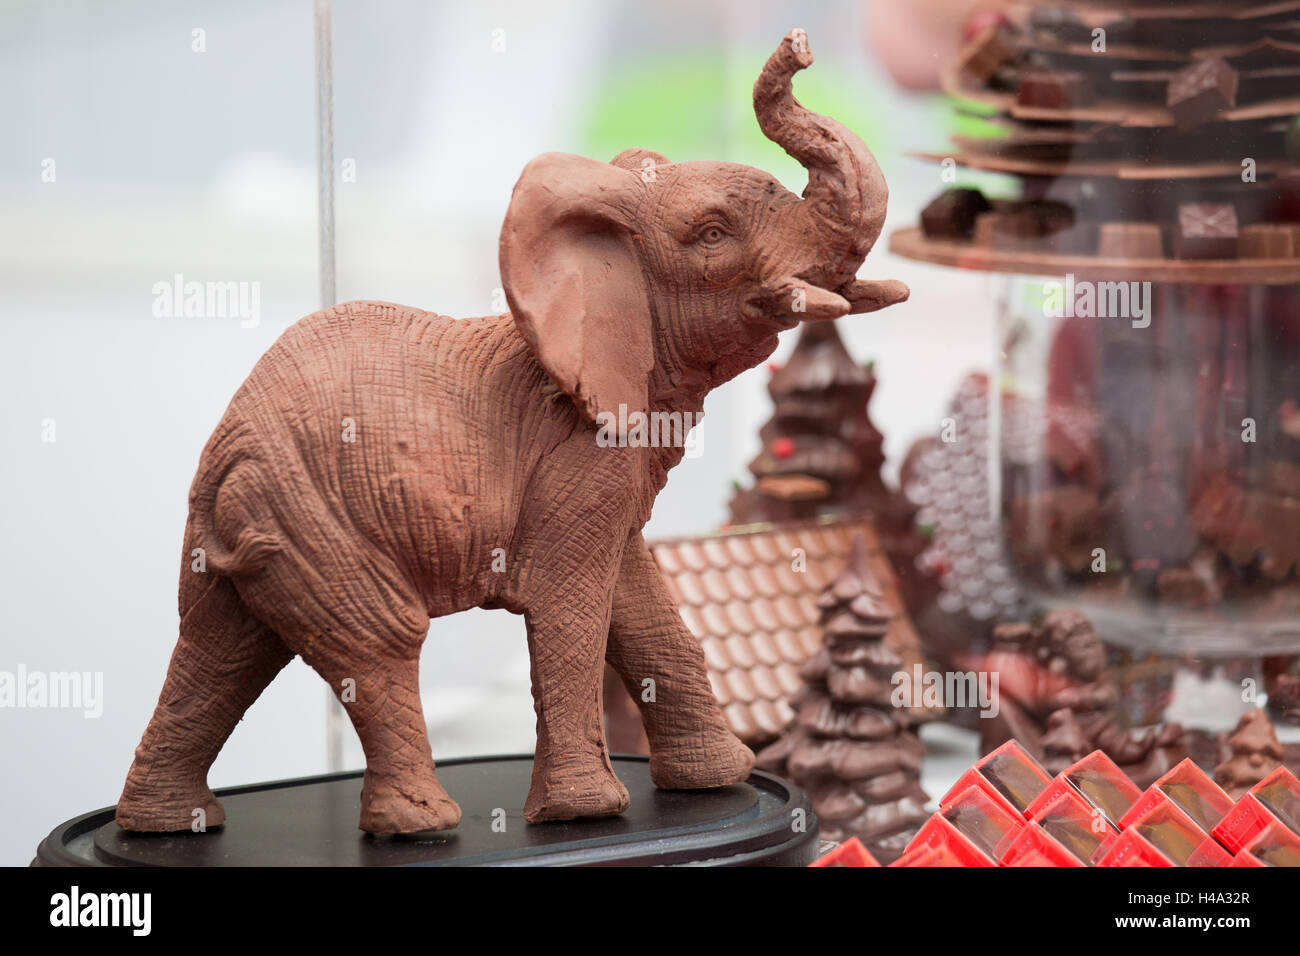 London, UK. 14th October, 2016. Sculpture of an elephant made of chocolate  at The Chocolate Show that takes place at Olympia London, UK from 14th-16th  October 2016, as the grand finale of